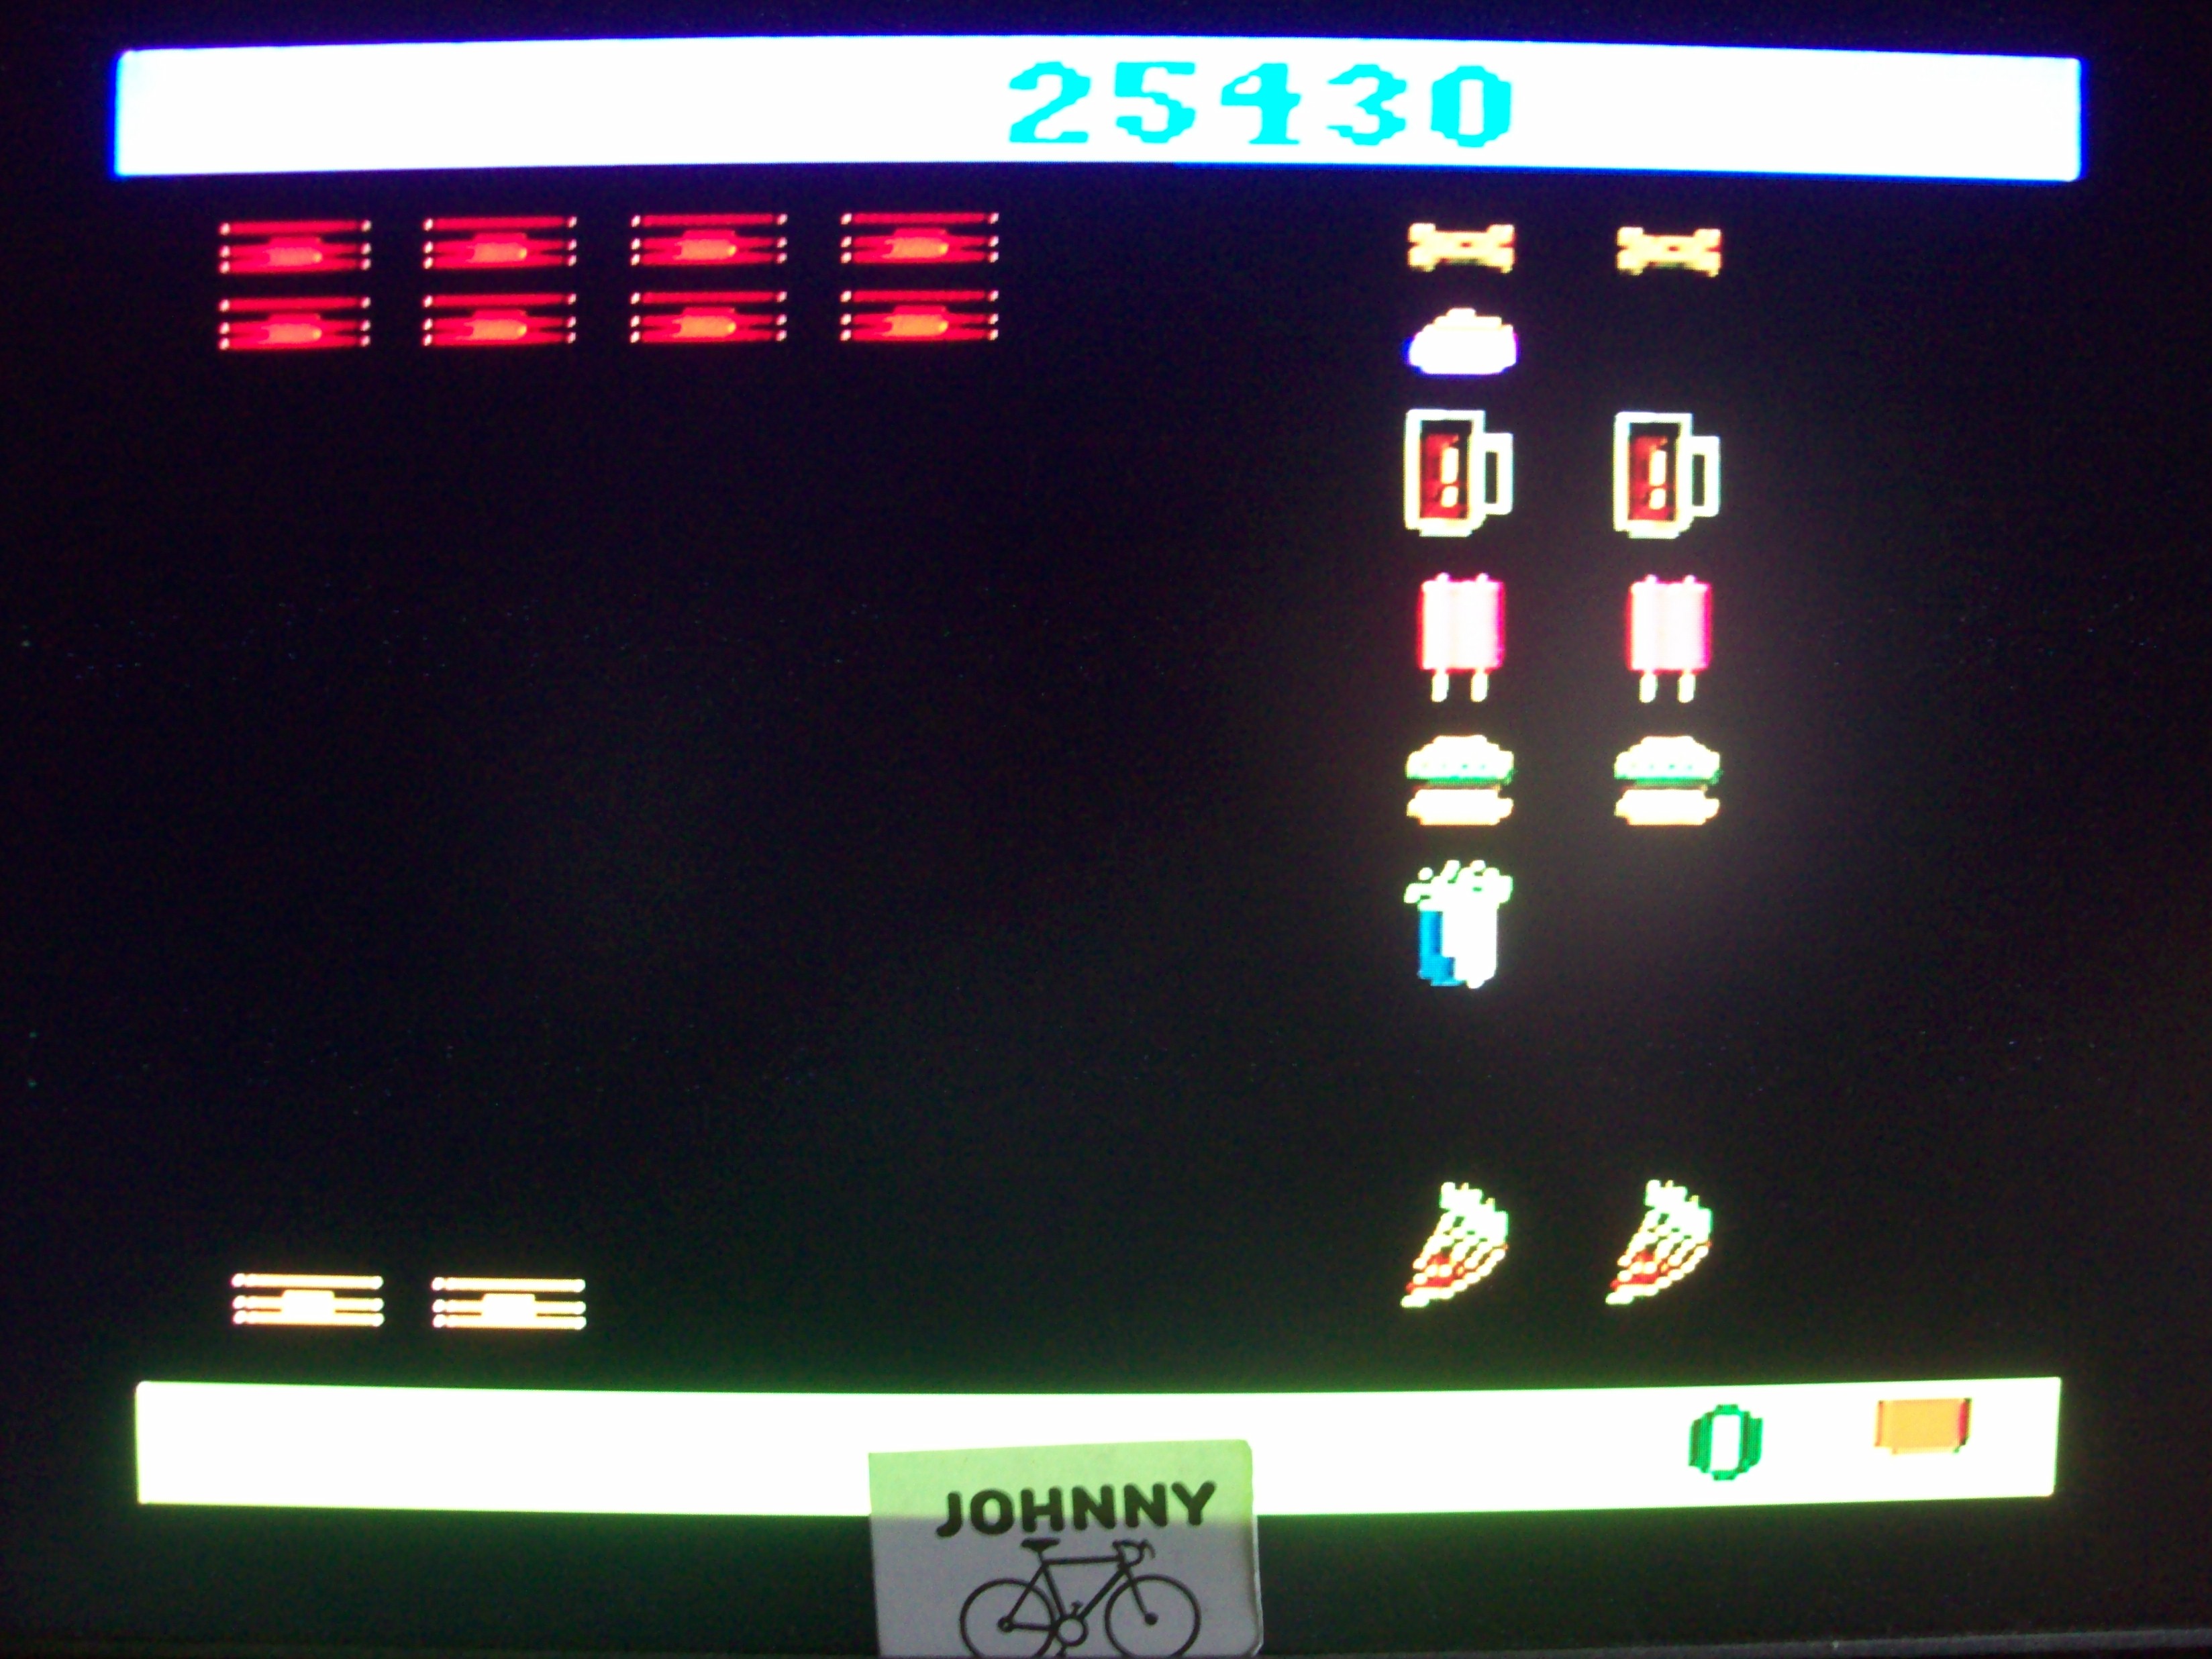 JohnnyTenspeed: Snoopy and the Red Baron (Atari 2600 Novice/B) 25,430 points on 2015-12-01 09:23:29